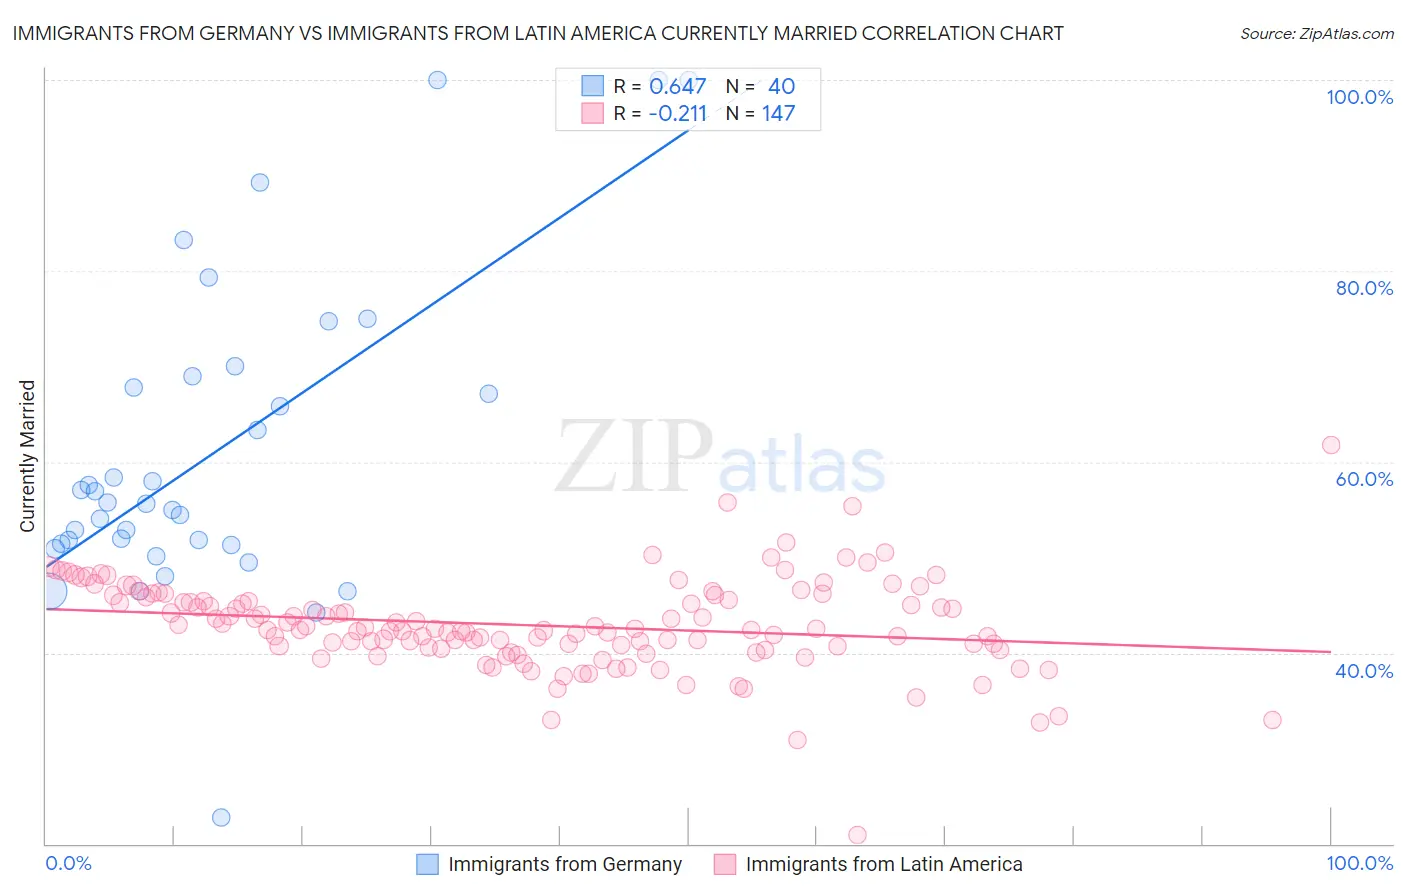 Immigrants from Germany vs Immigrants from Latin America Currently Married